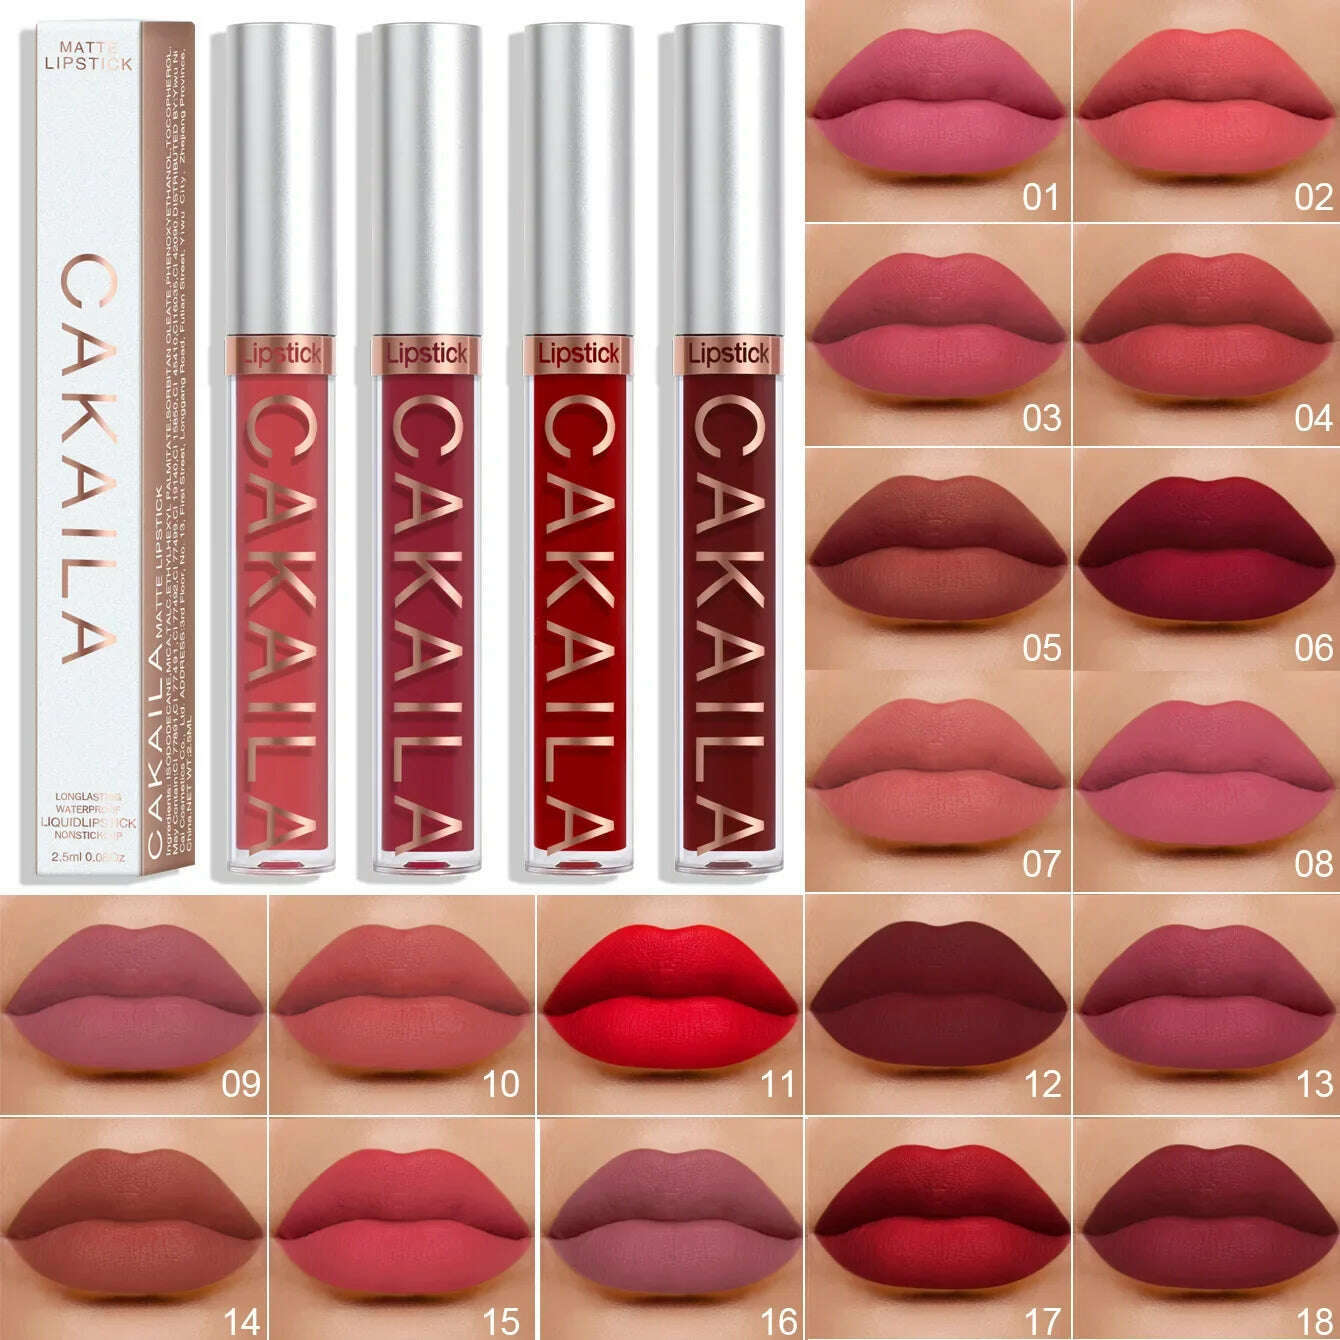 KIMLUD, 18 Colors Long Lasting Matte Nude Liquid Lipstick Waterproof Non-stick Cup Sexy Nude Red Brown Lip Gloss Lips Makeup Cosmetics, KIMLUD Womens Clothes